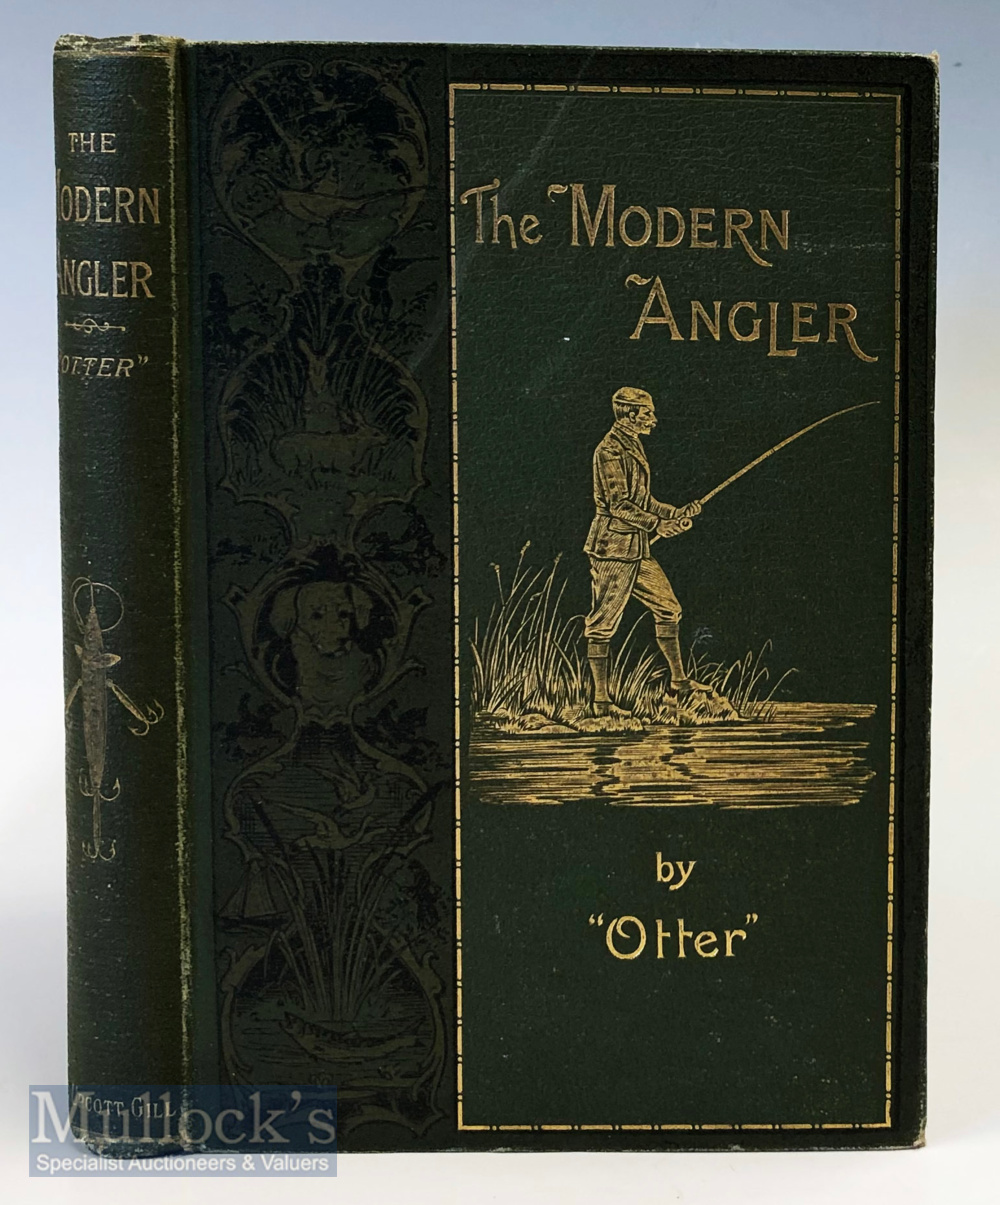 Otter – “The Modern Angler” 1898 1st edition 2nd issue, containing illustrations and adverts with